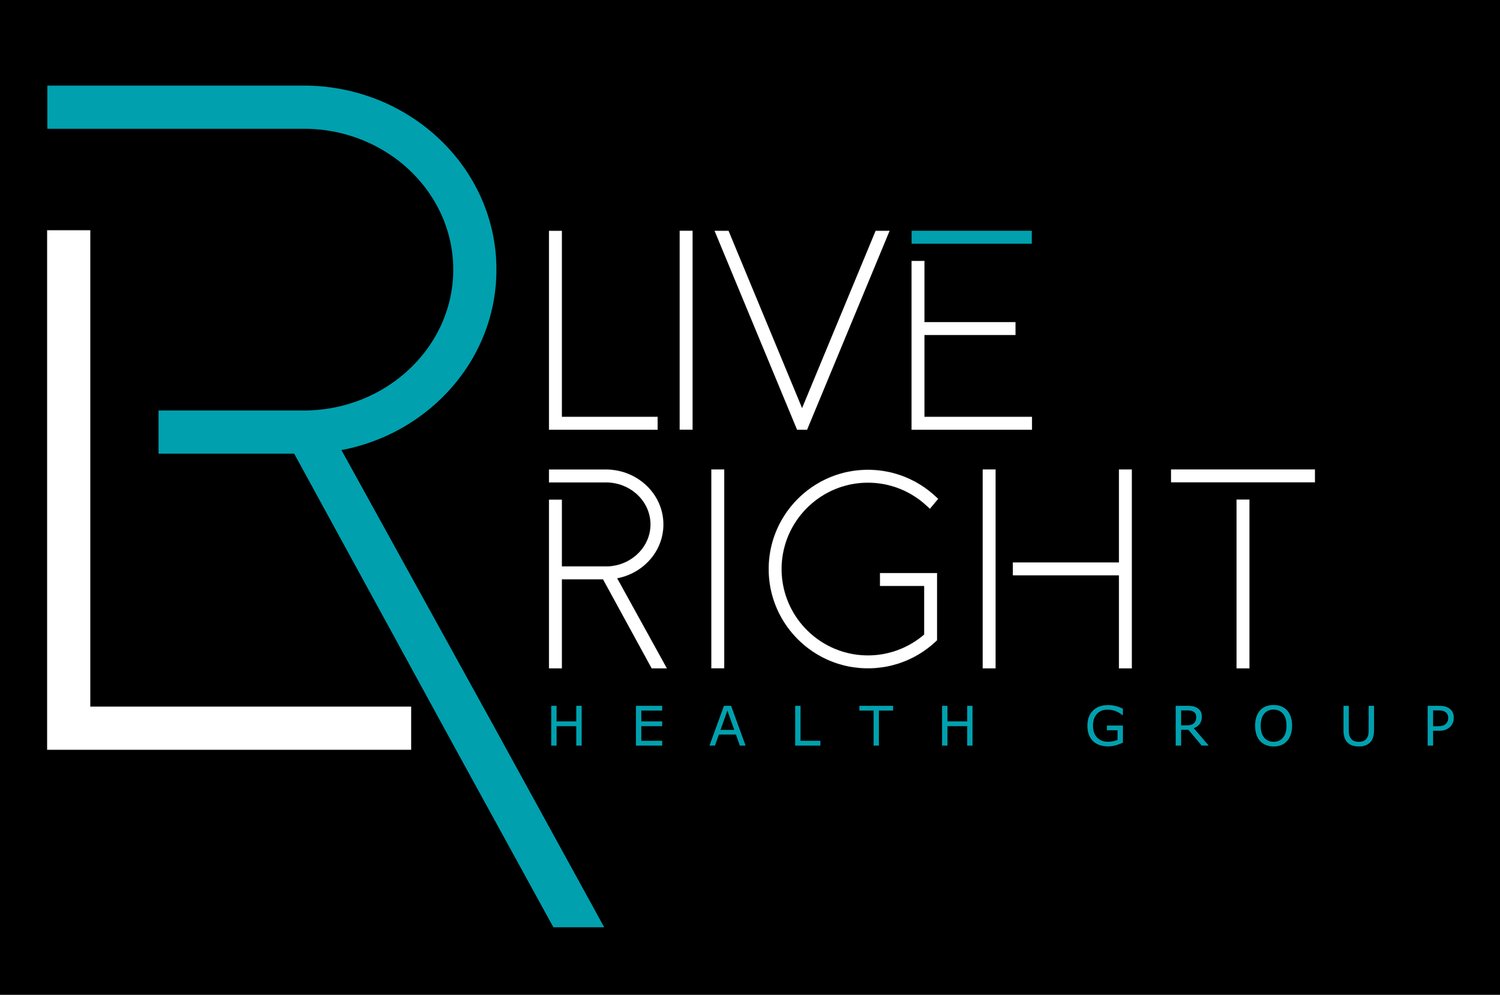 Live Right Health Group